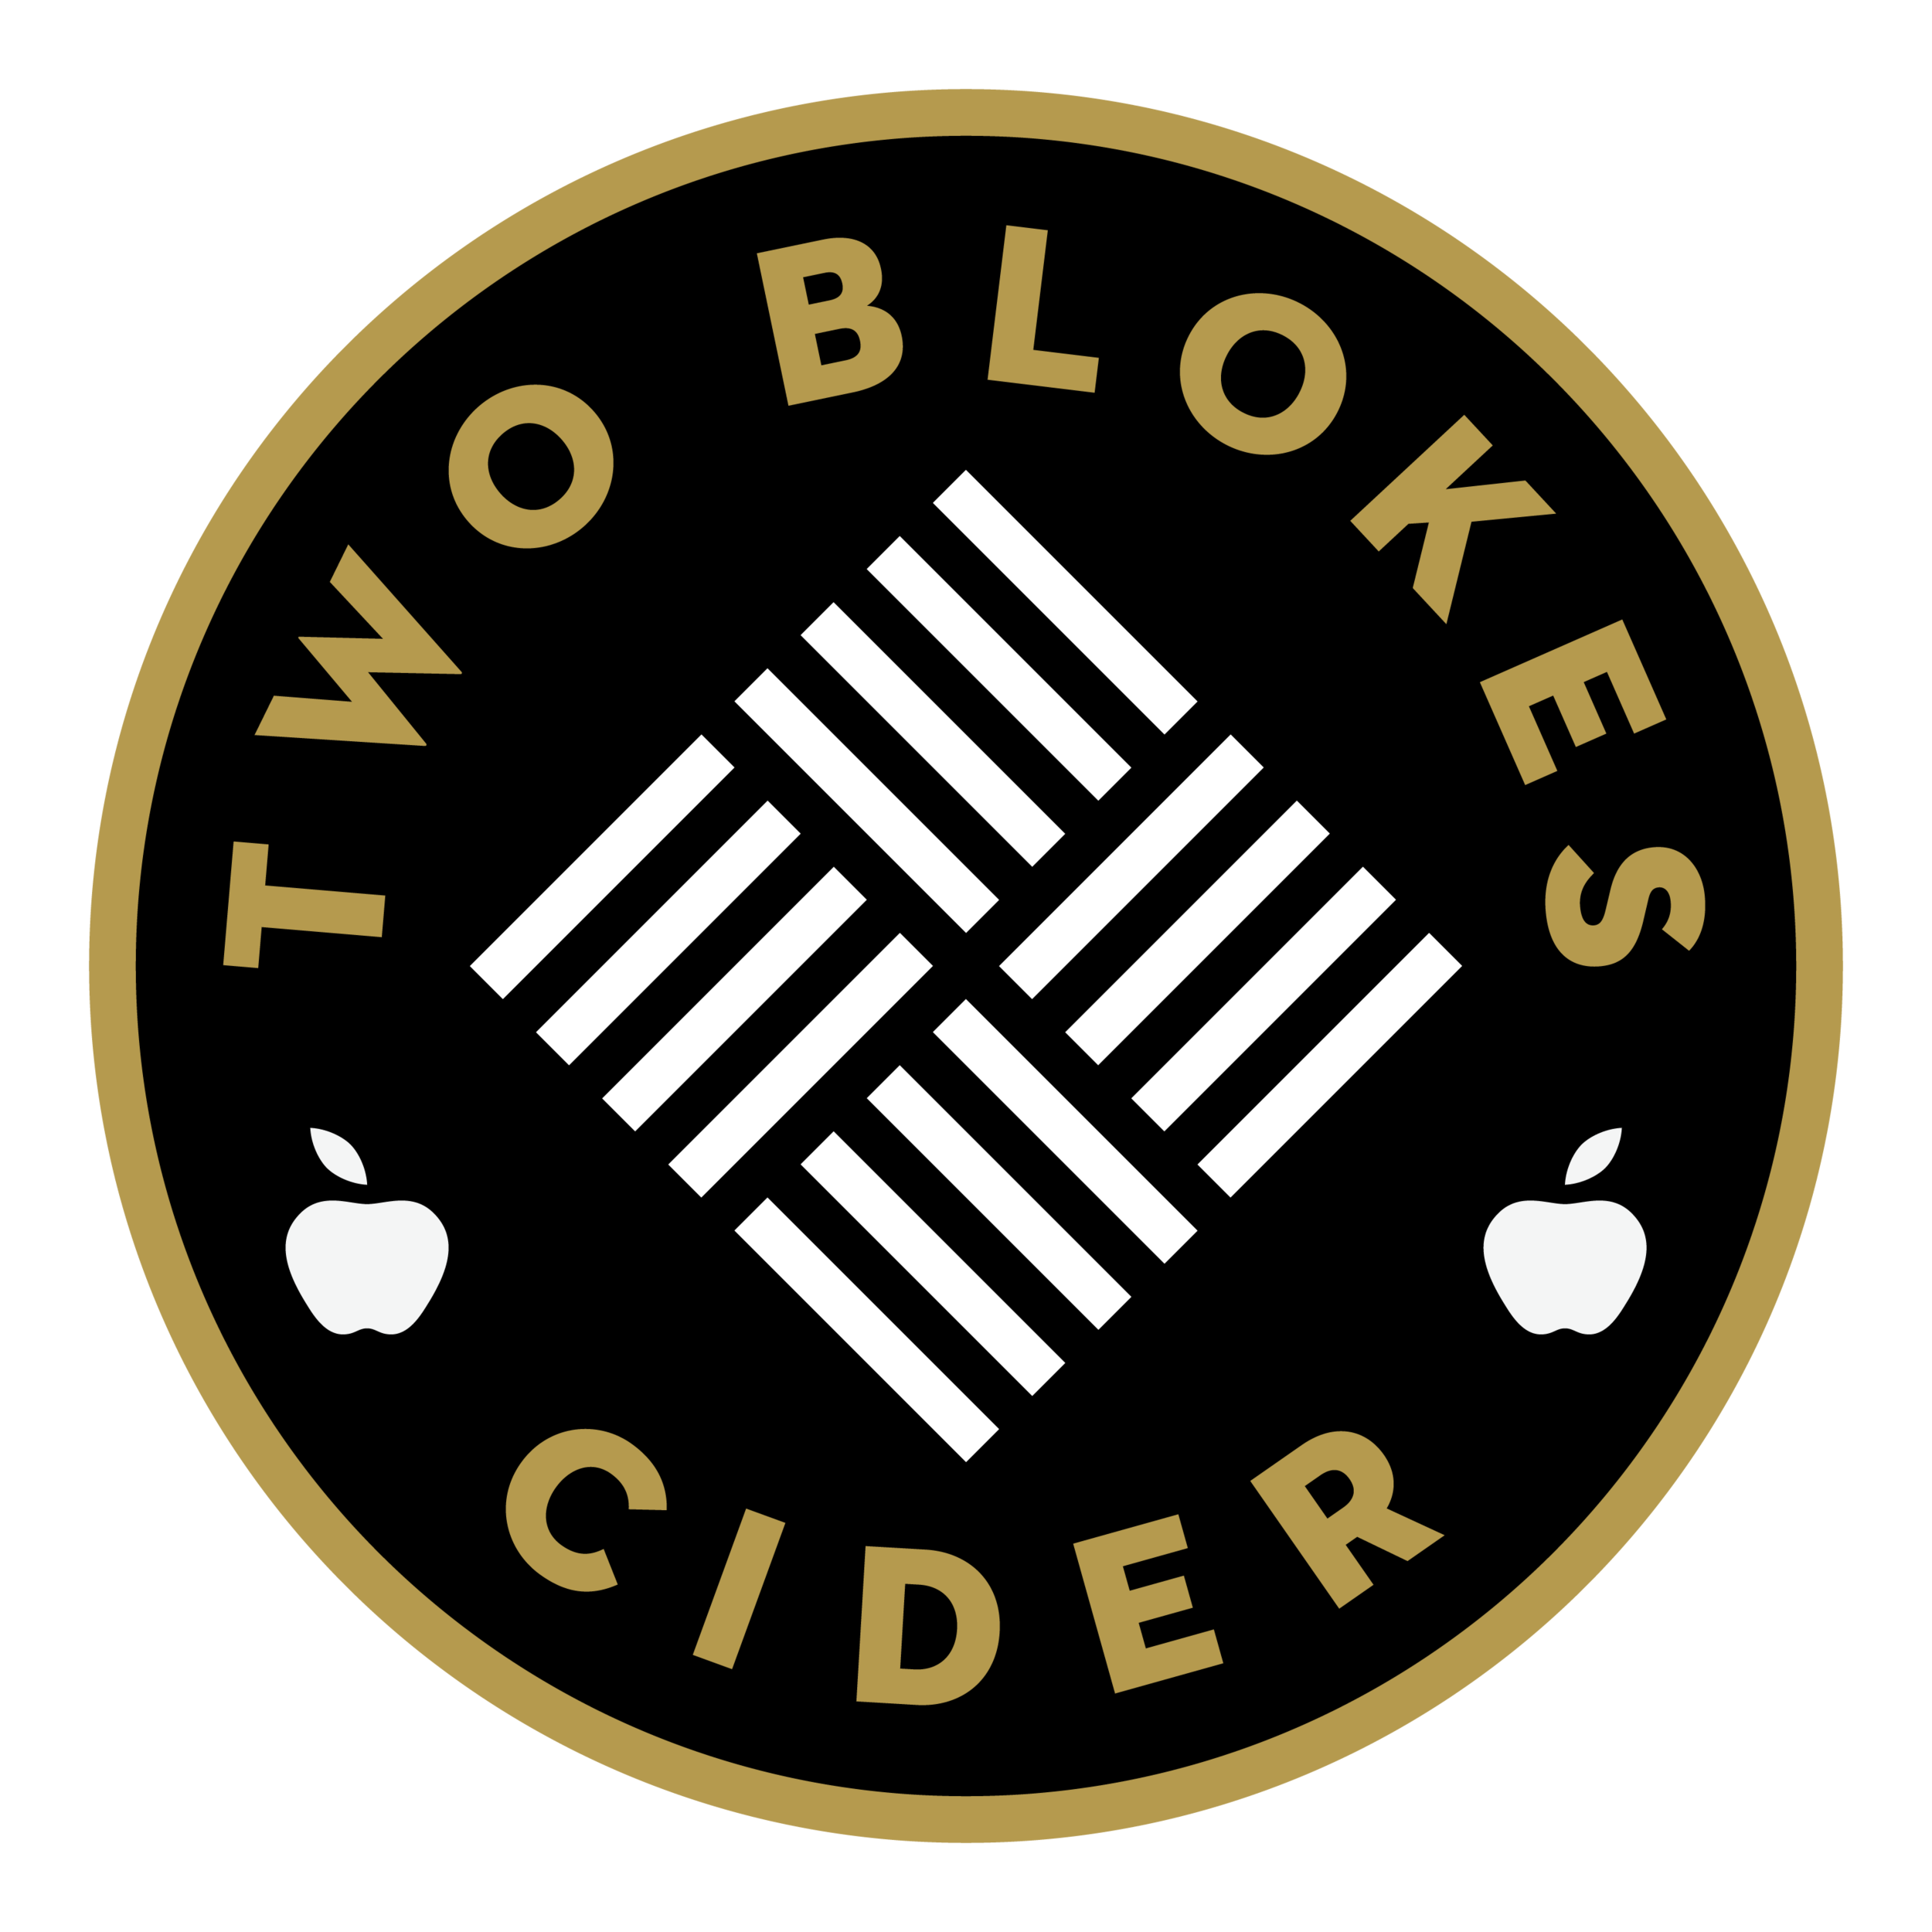 Two Blokes Cider